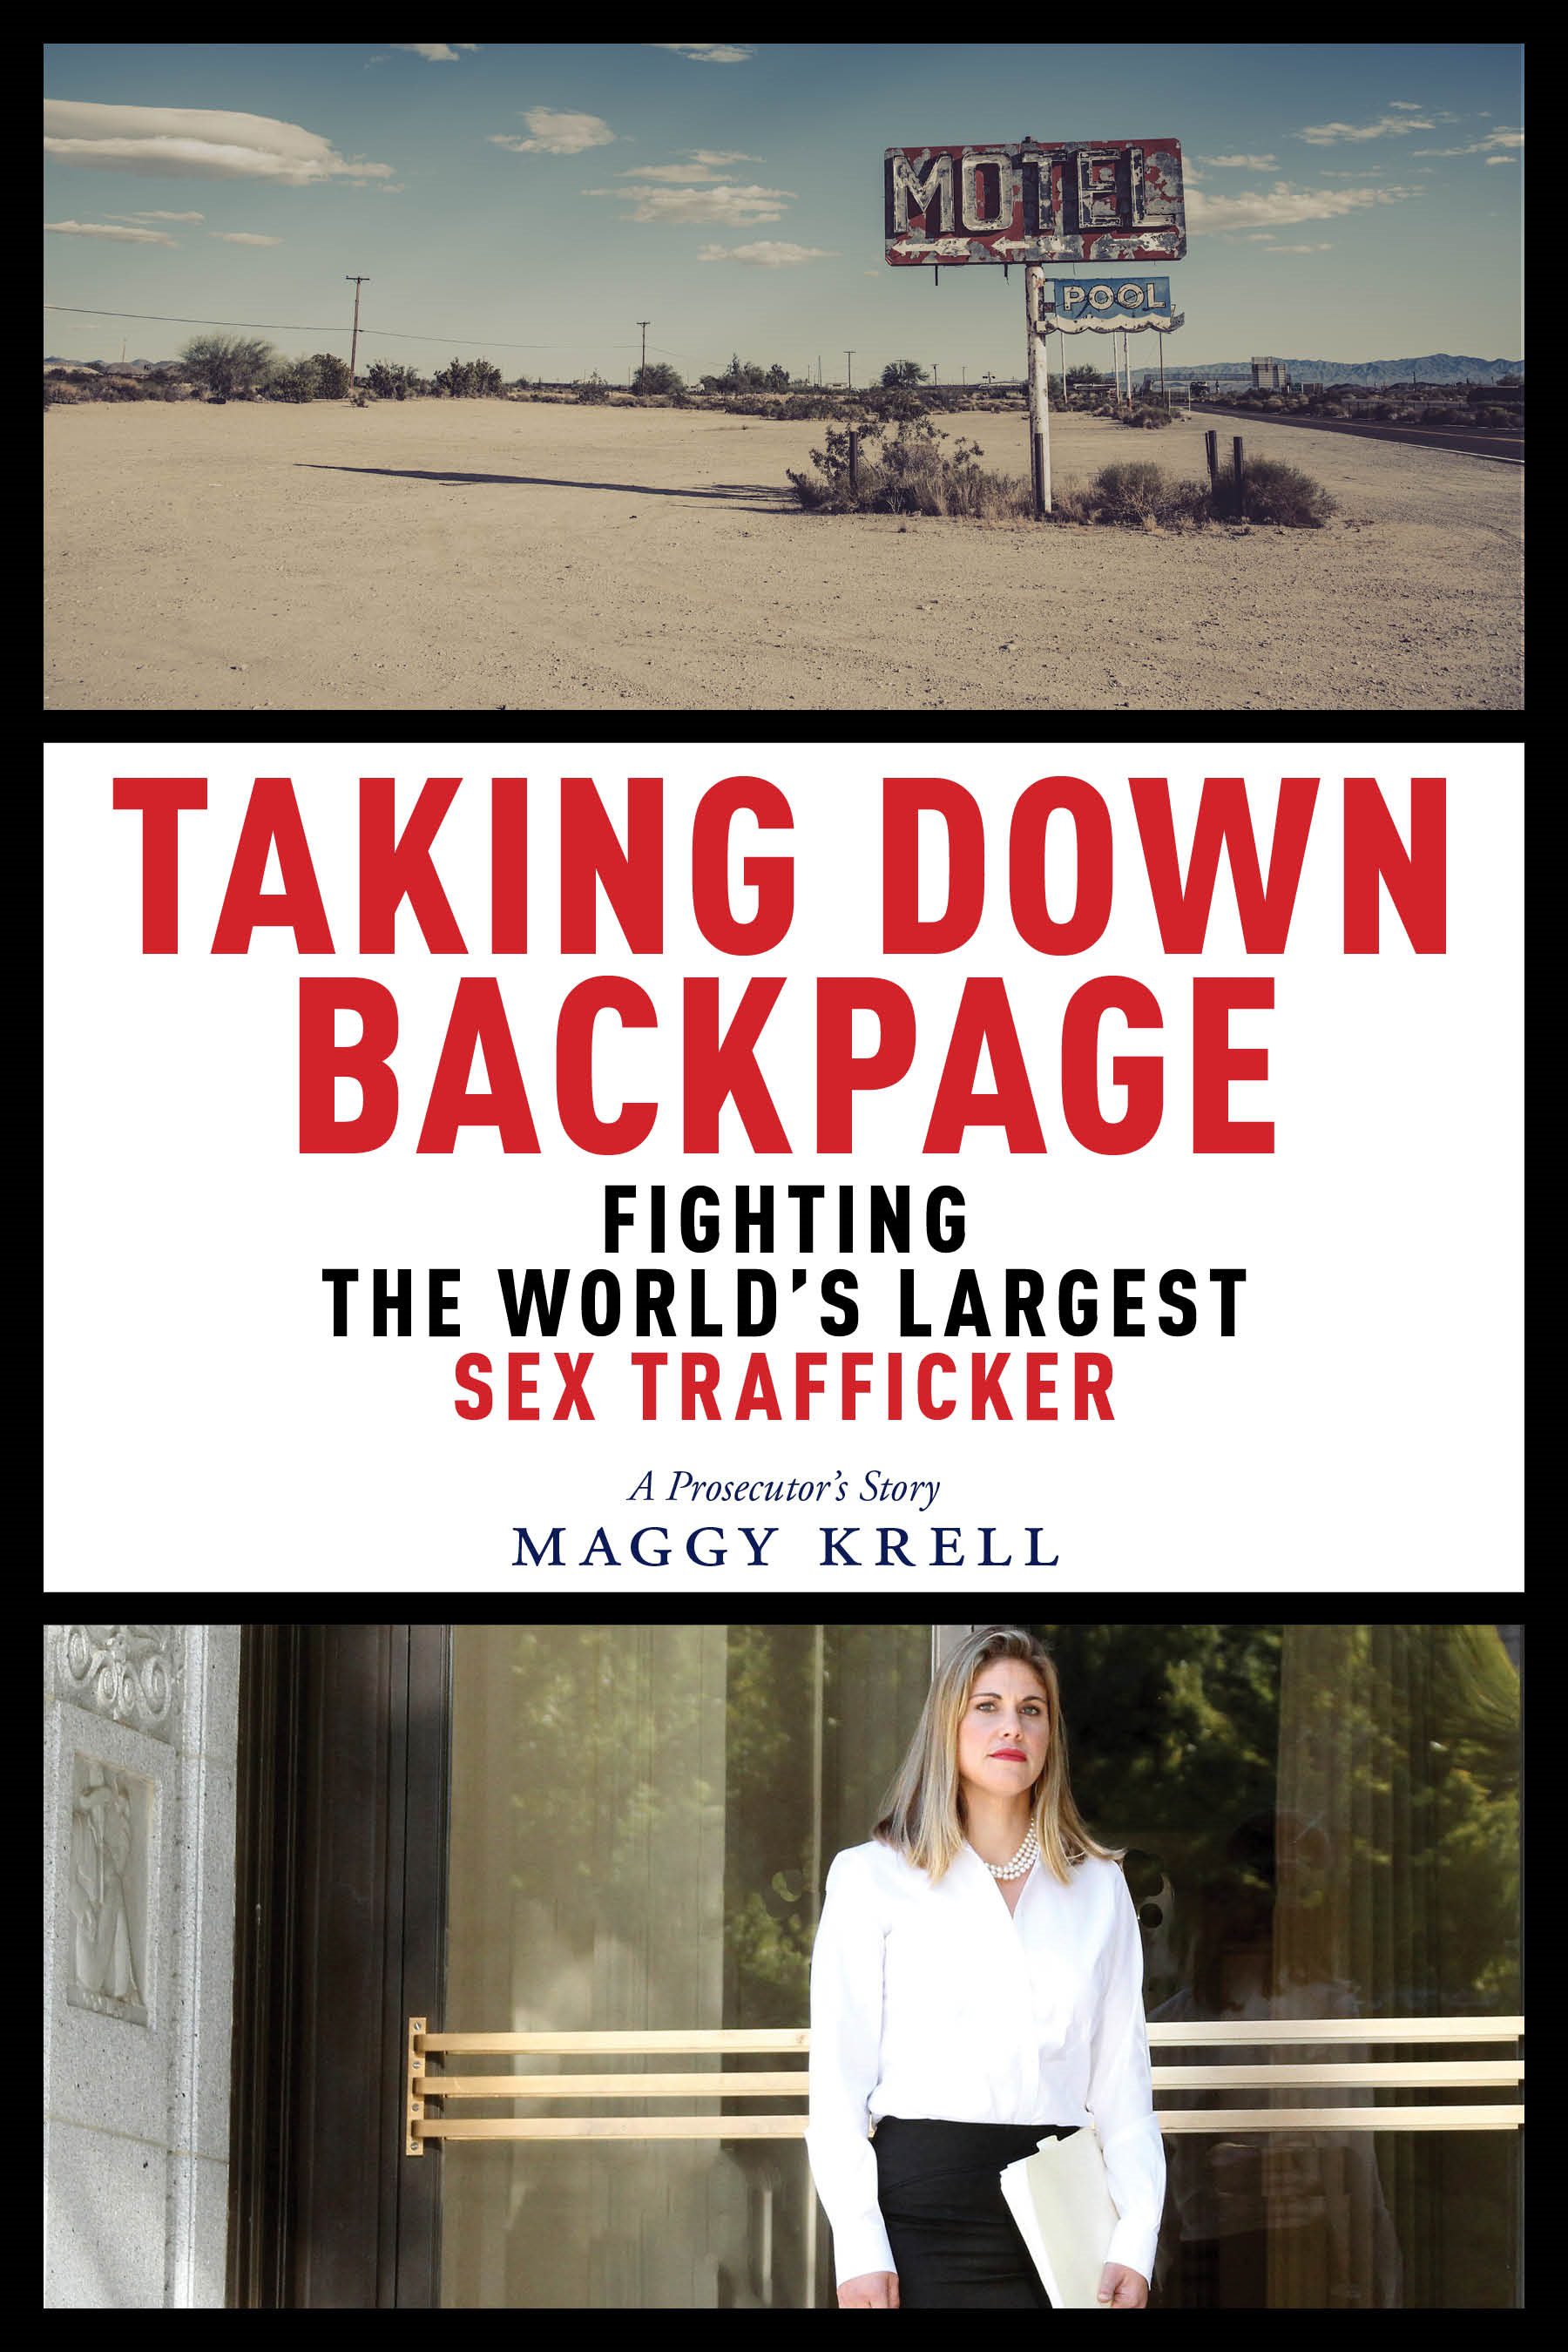 "Taking Down Backpage: Fighting the World's Largest Sex Trafficker" by Maggy Krell